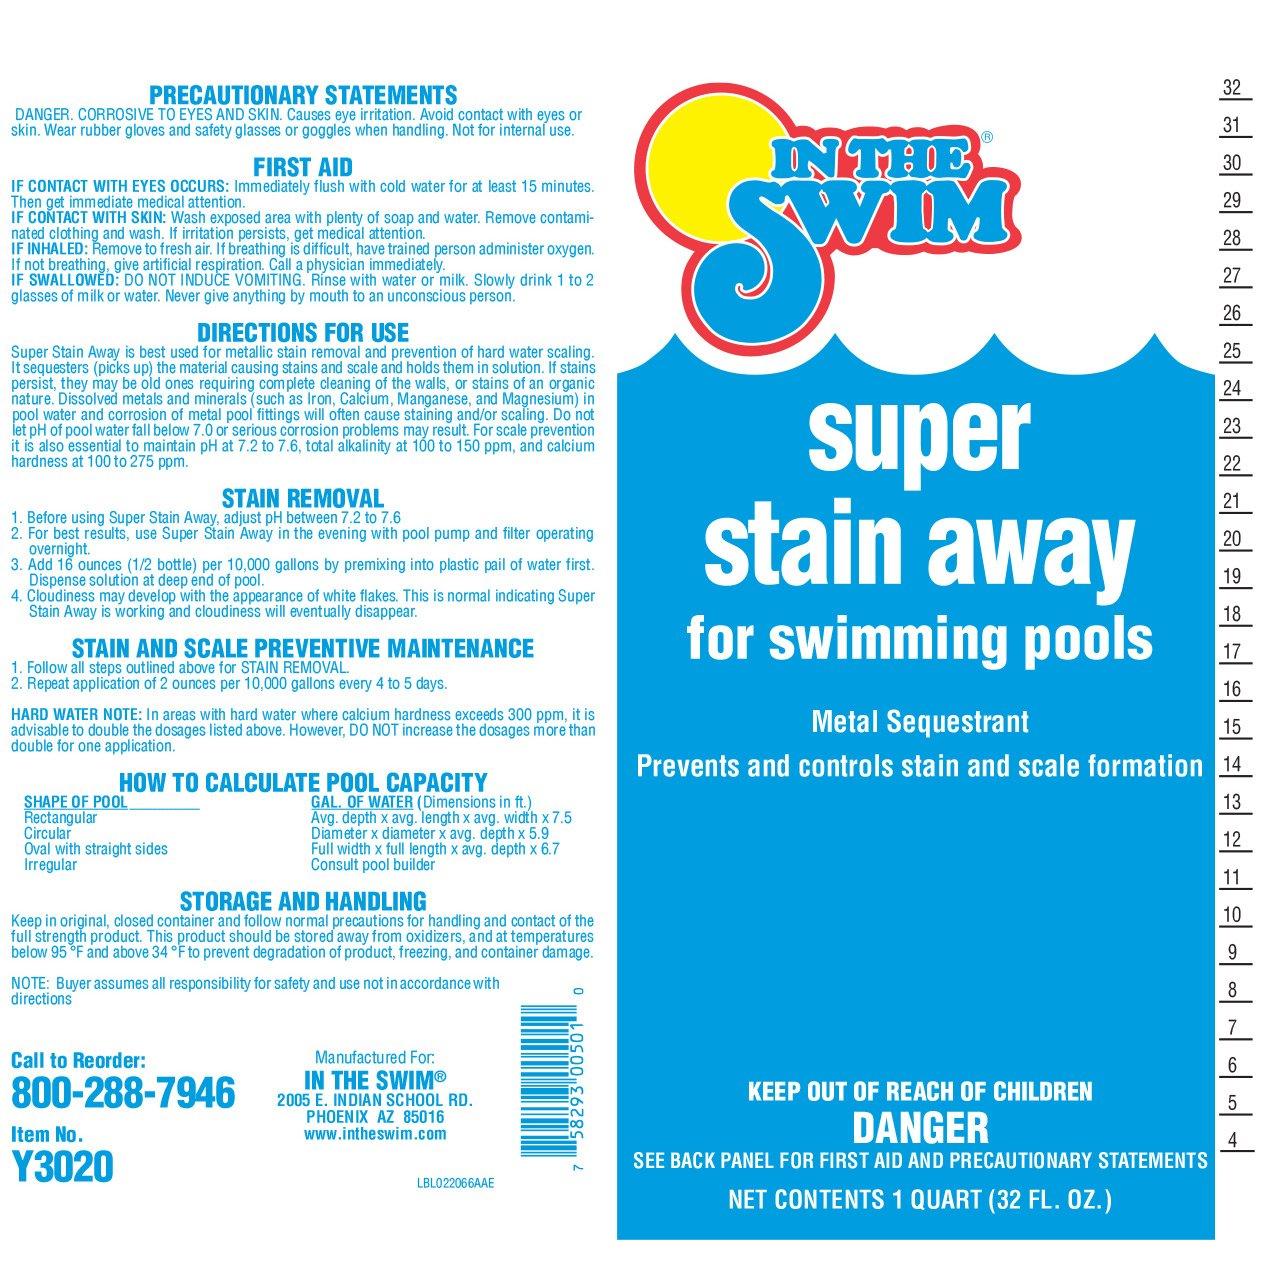 In The Swim  Super Stain Away for Swimming Pools 1 qt.